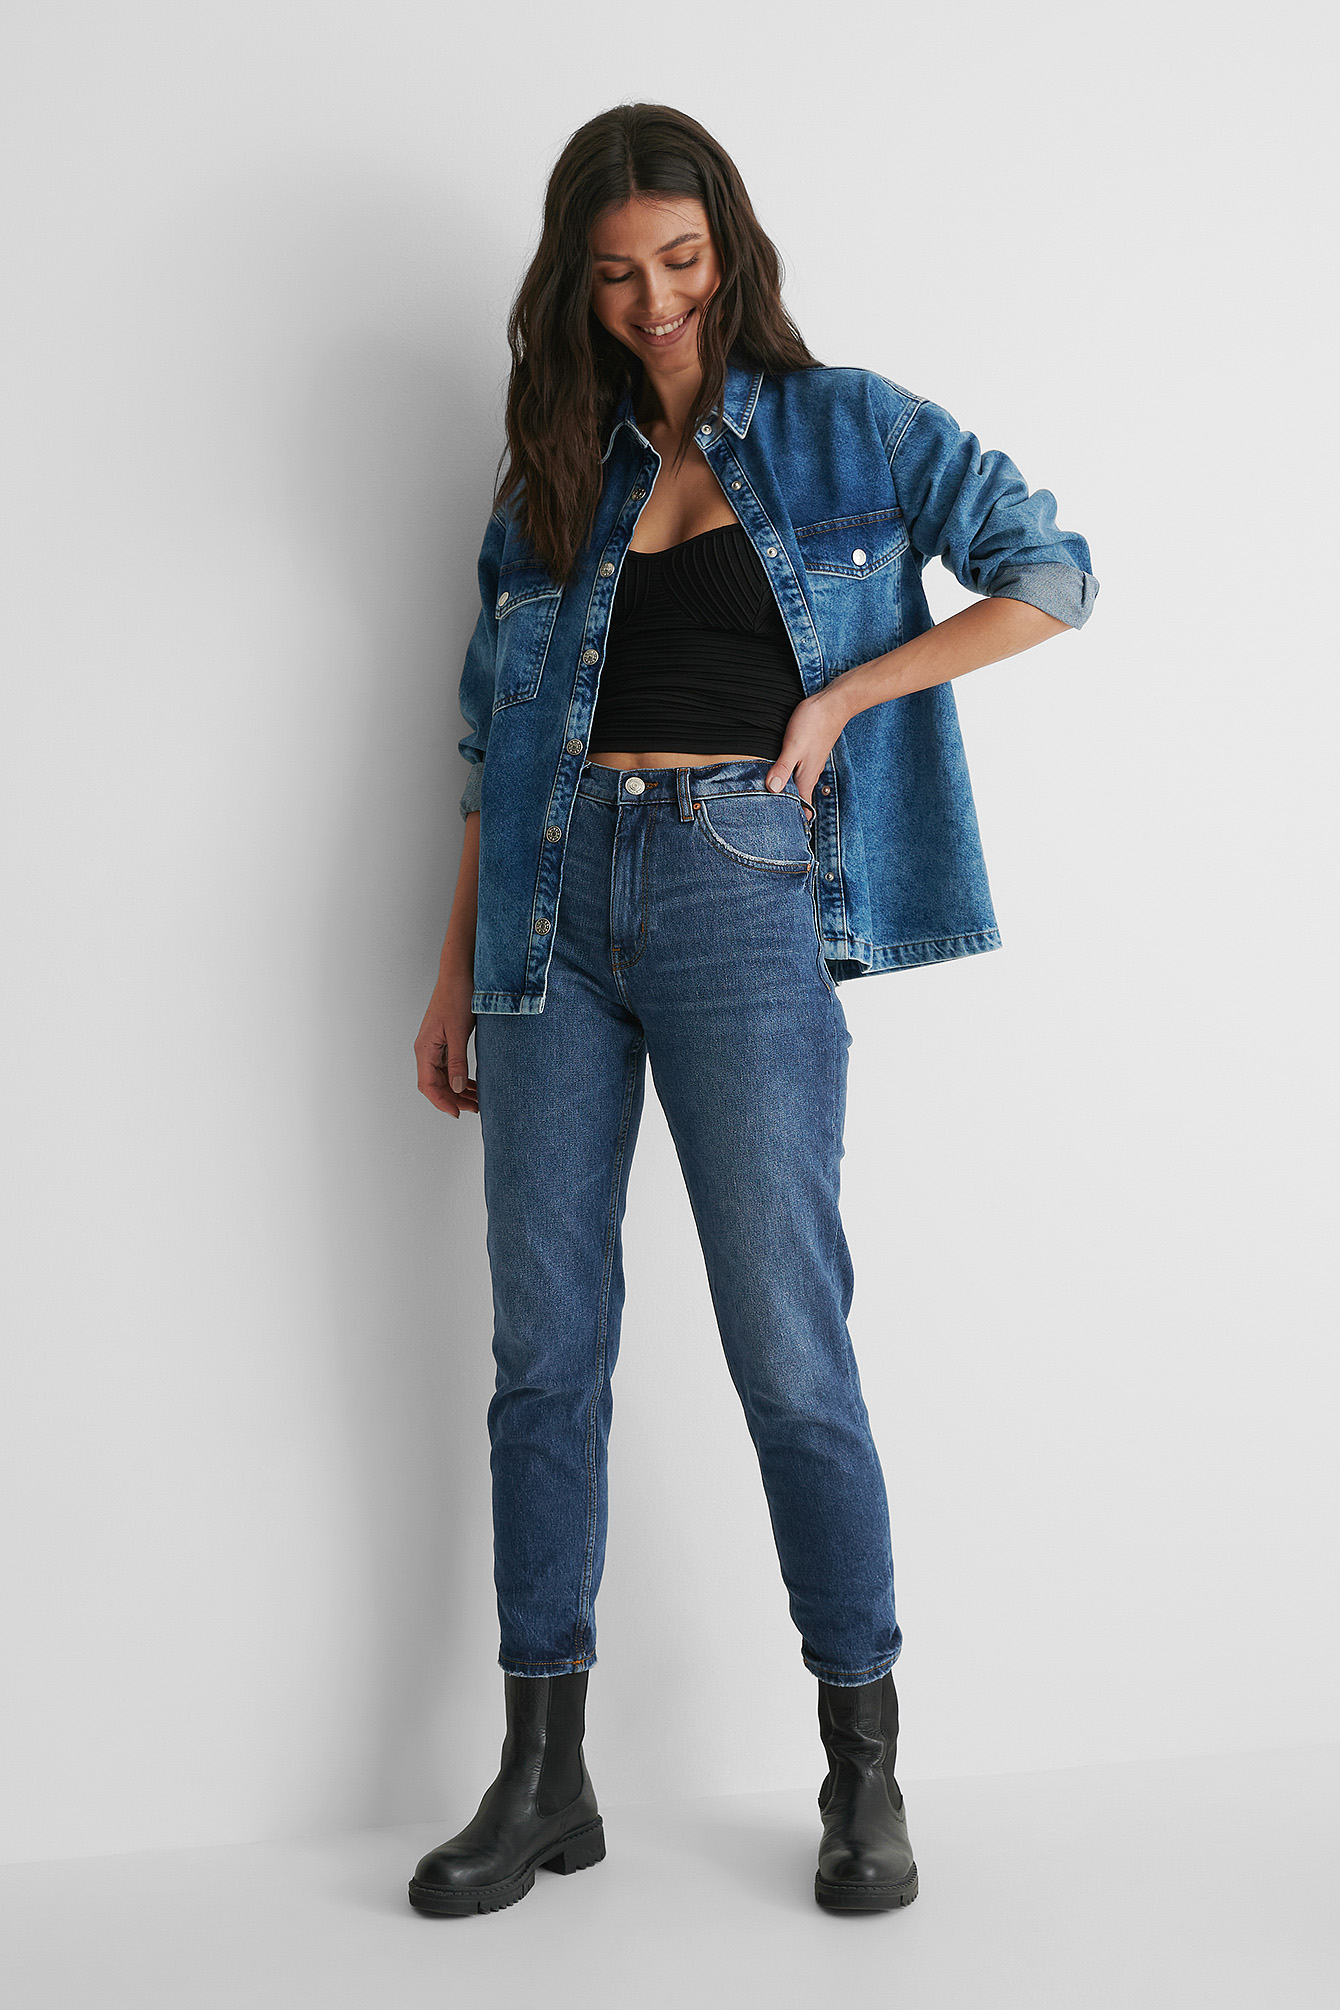 Mango Kendall Top with Denim Shirt and Jeans.